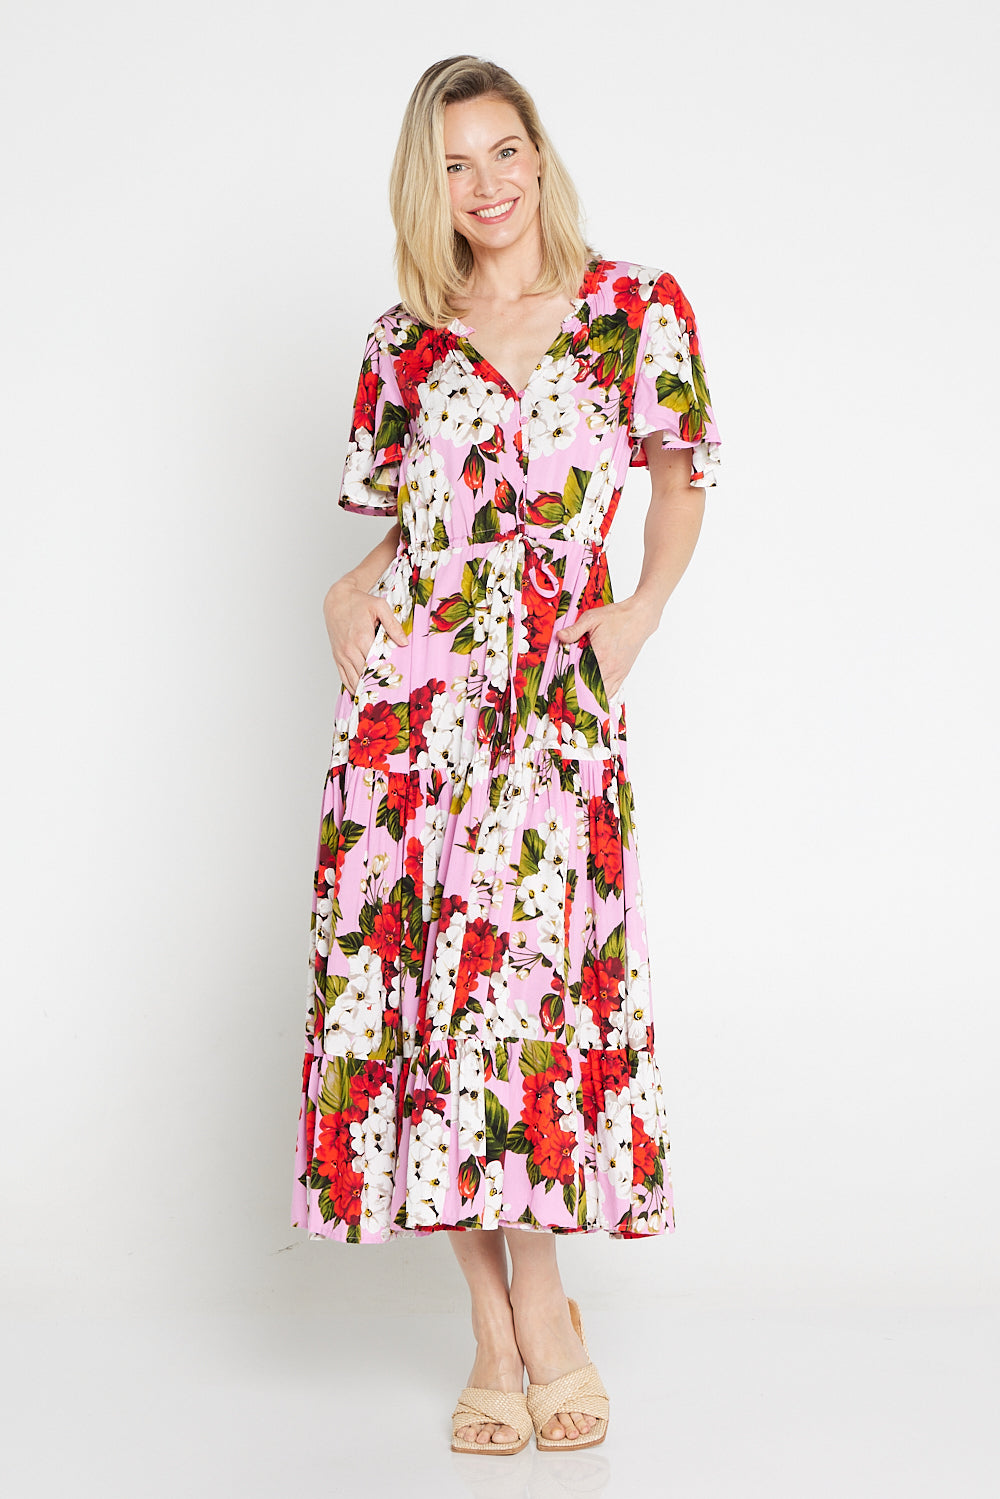 Briony Dress - Red/Pink Floral